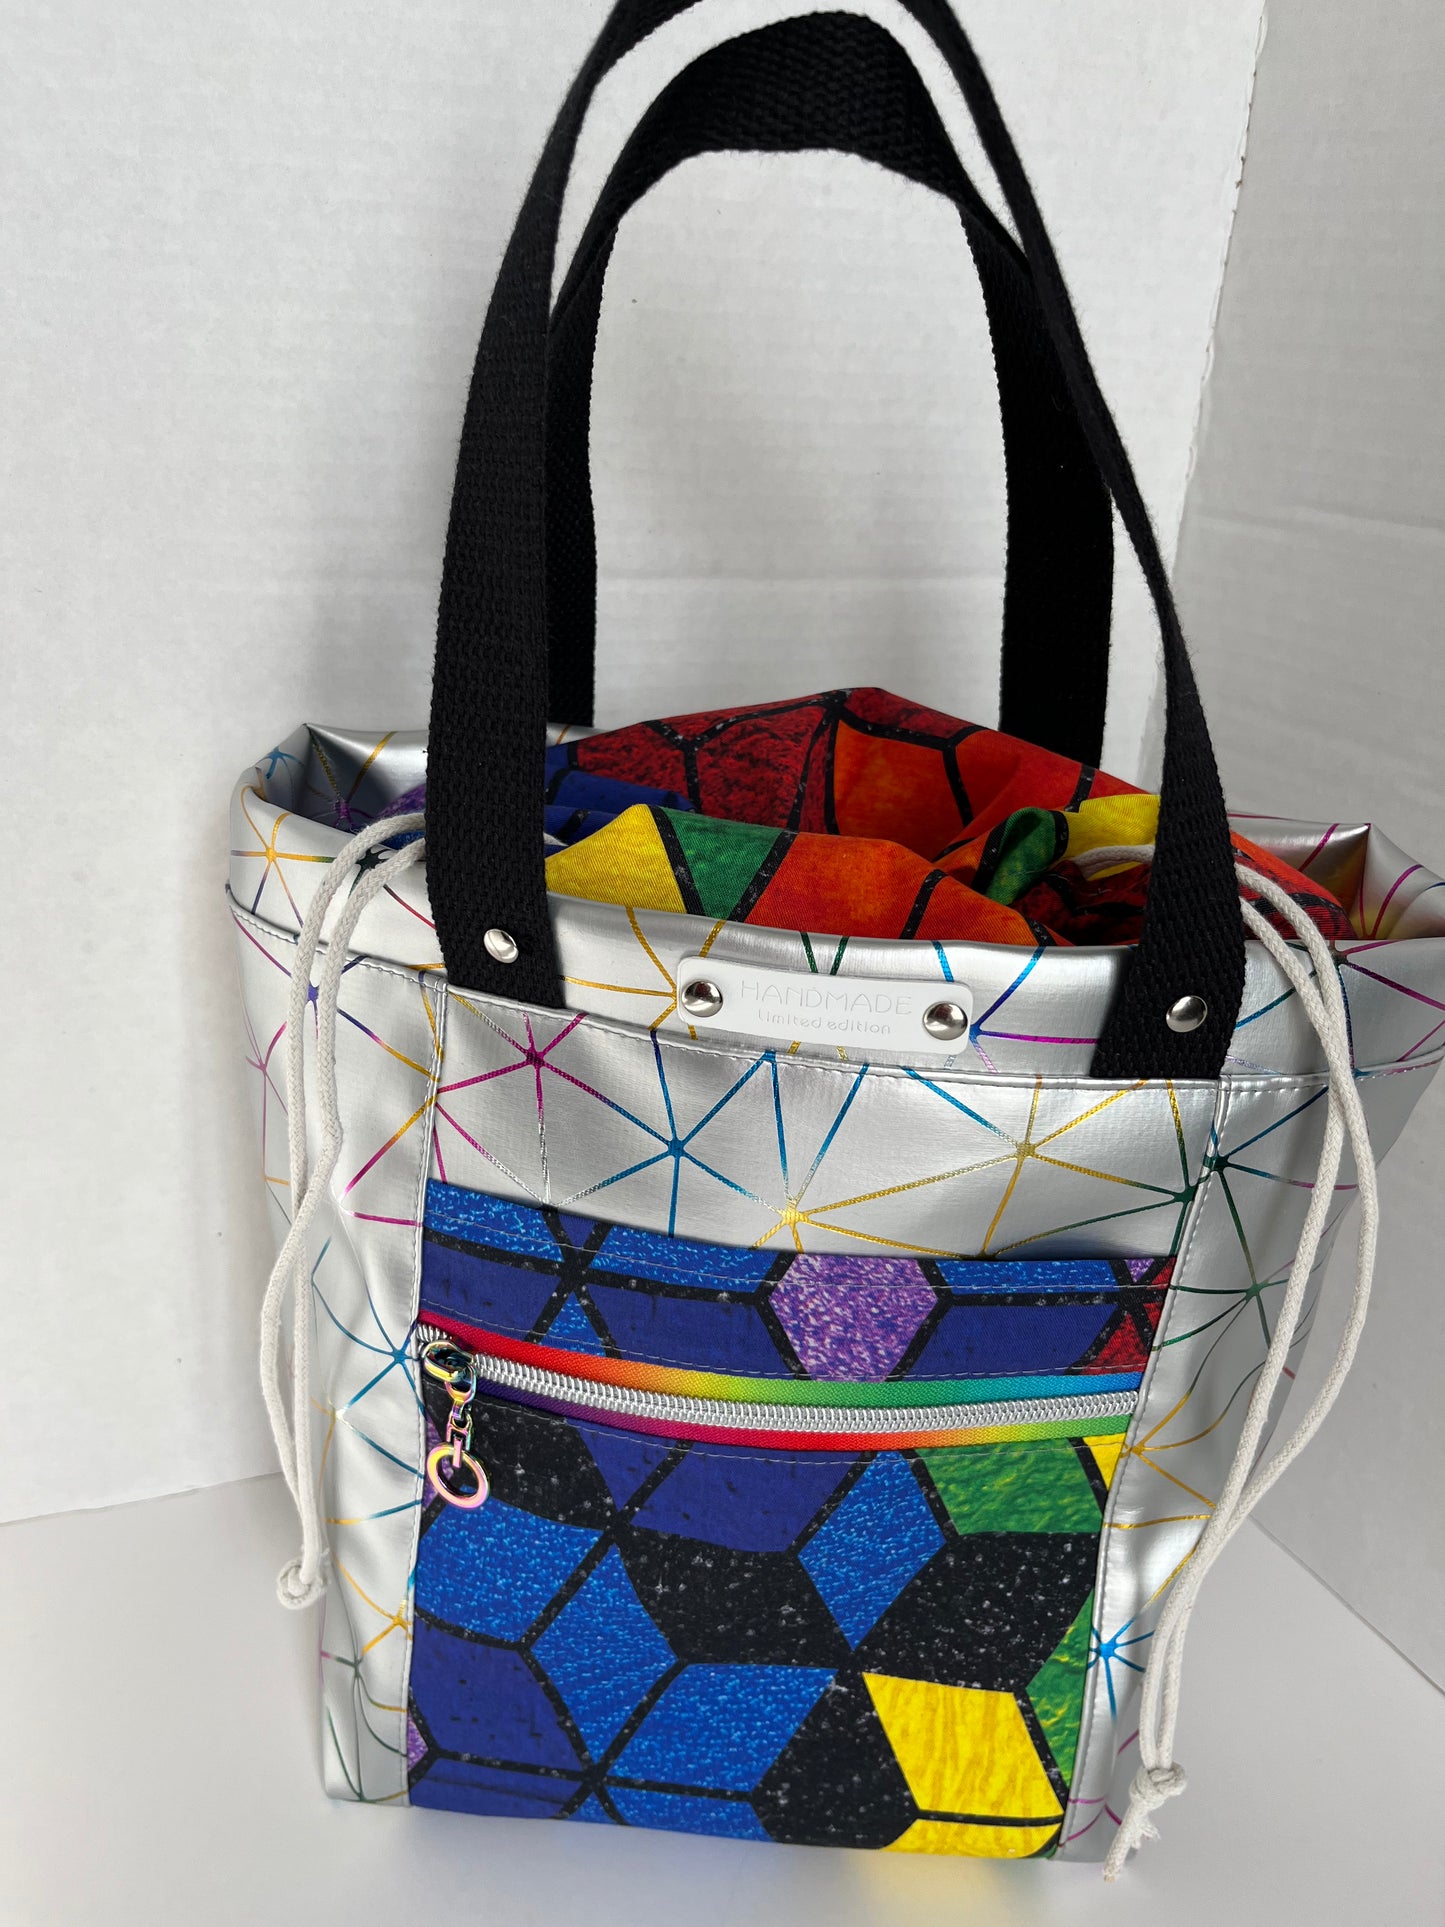 Silver Rainbow Geometric Project Bag, Firefly Tote, Cotton and Vinyl Bag